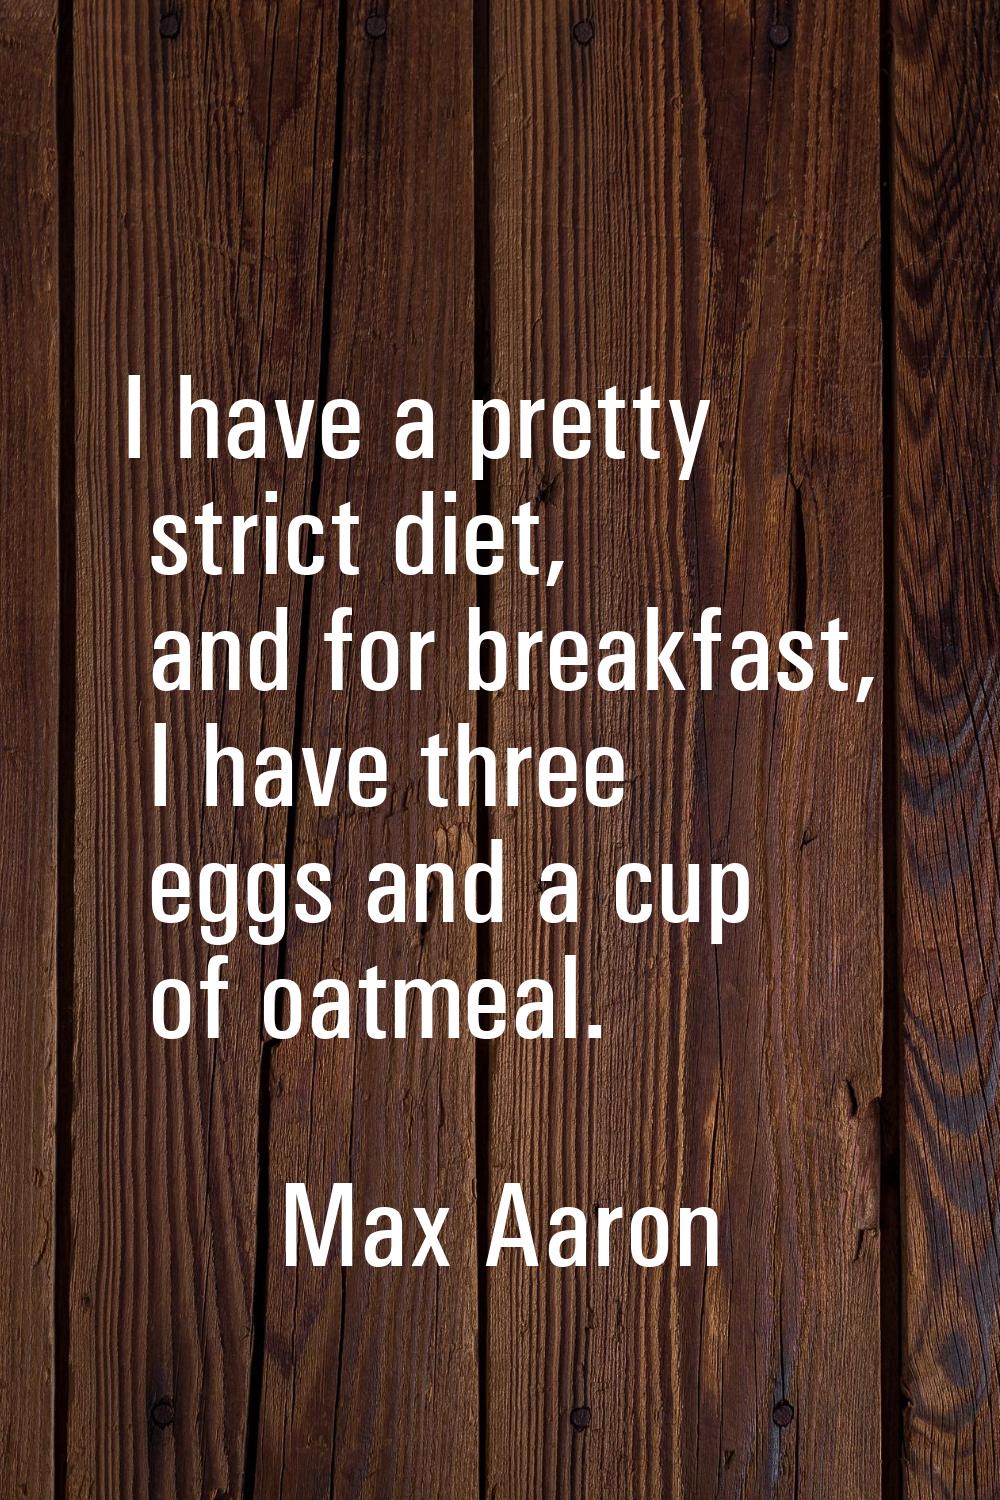 I have a pretty strict diet, and for breakfast, I have three eggs and a cup of oatmeal.